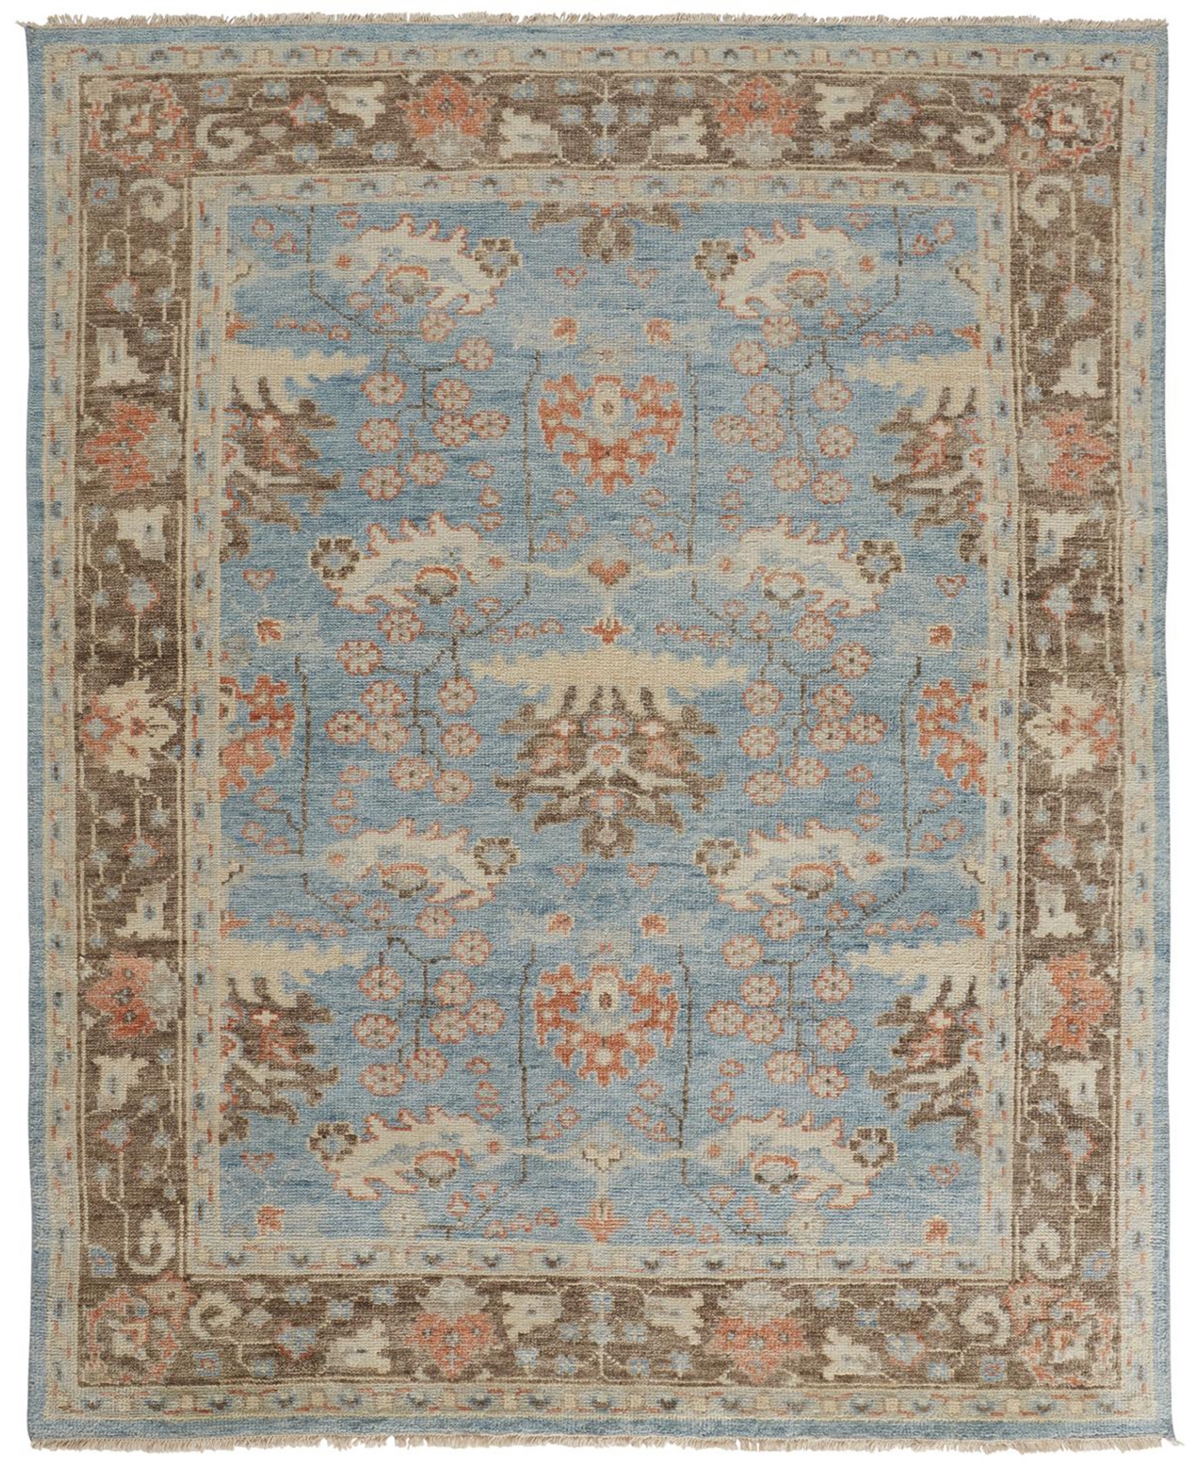 Feizy Halina HAL6710 3'6in x 5'6in Area Rug - Blue, Brown